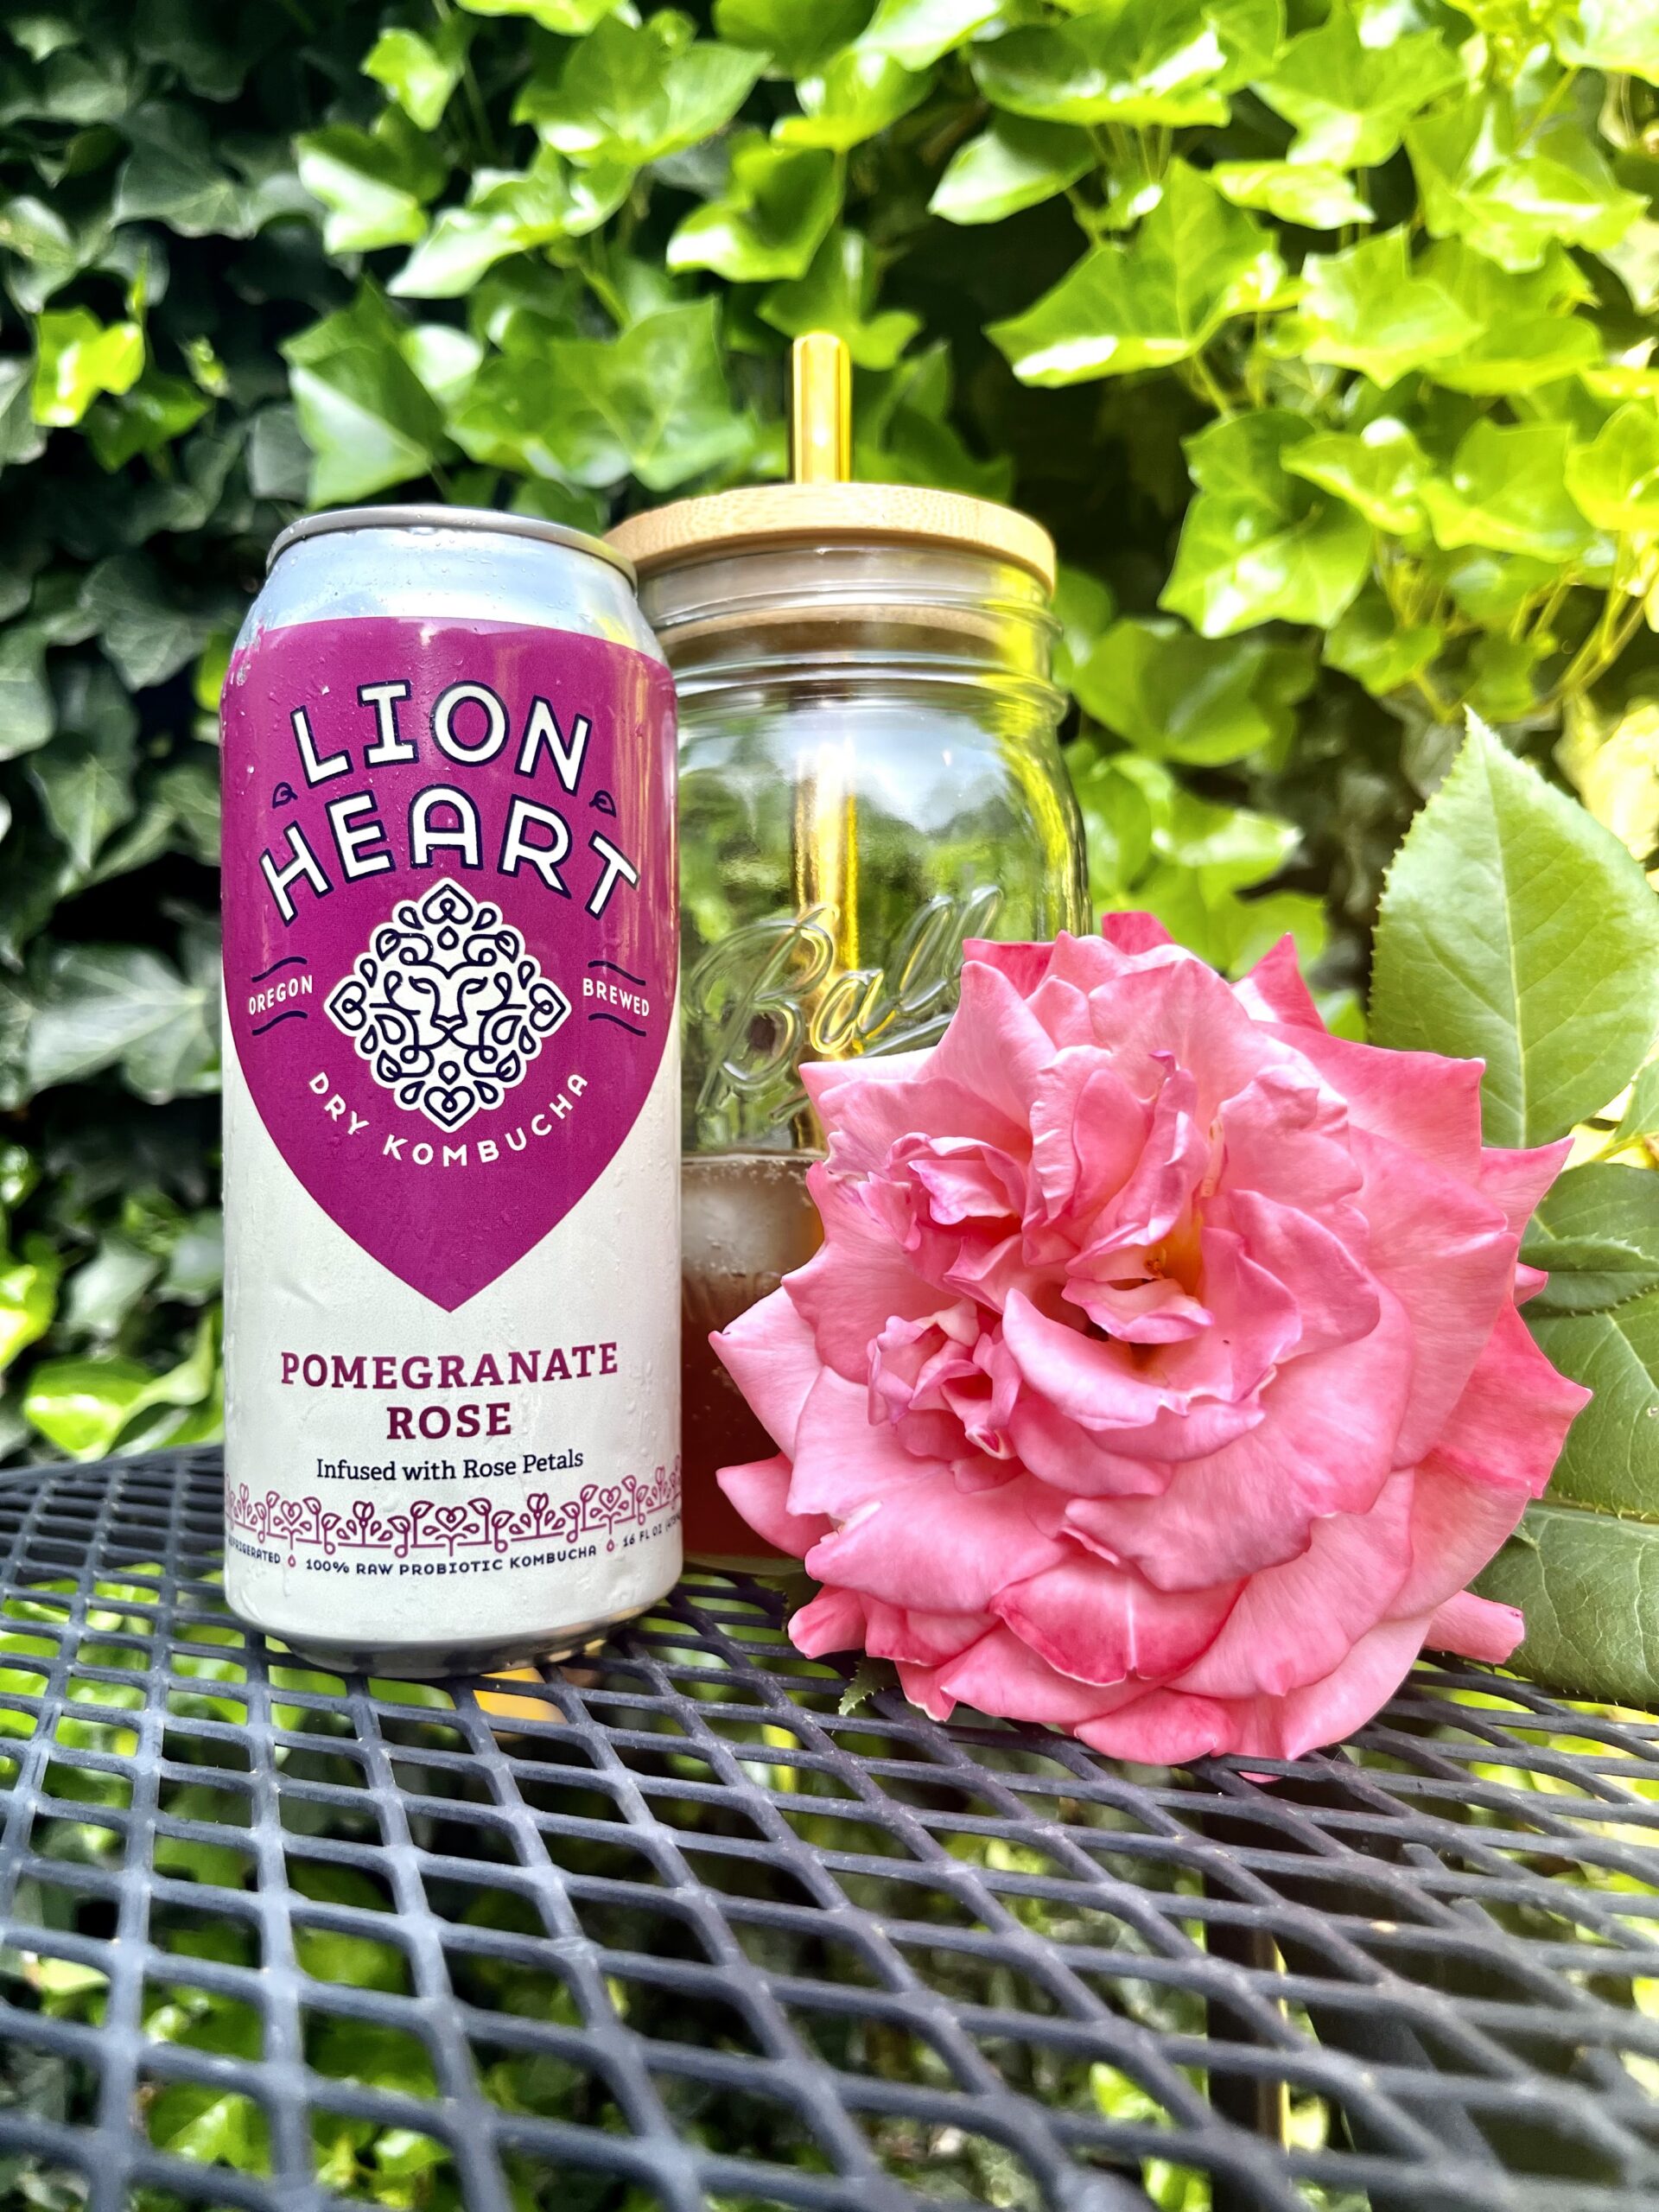 Drink Lion Heart Kombucha at your party or wedding.